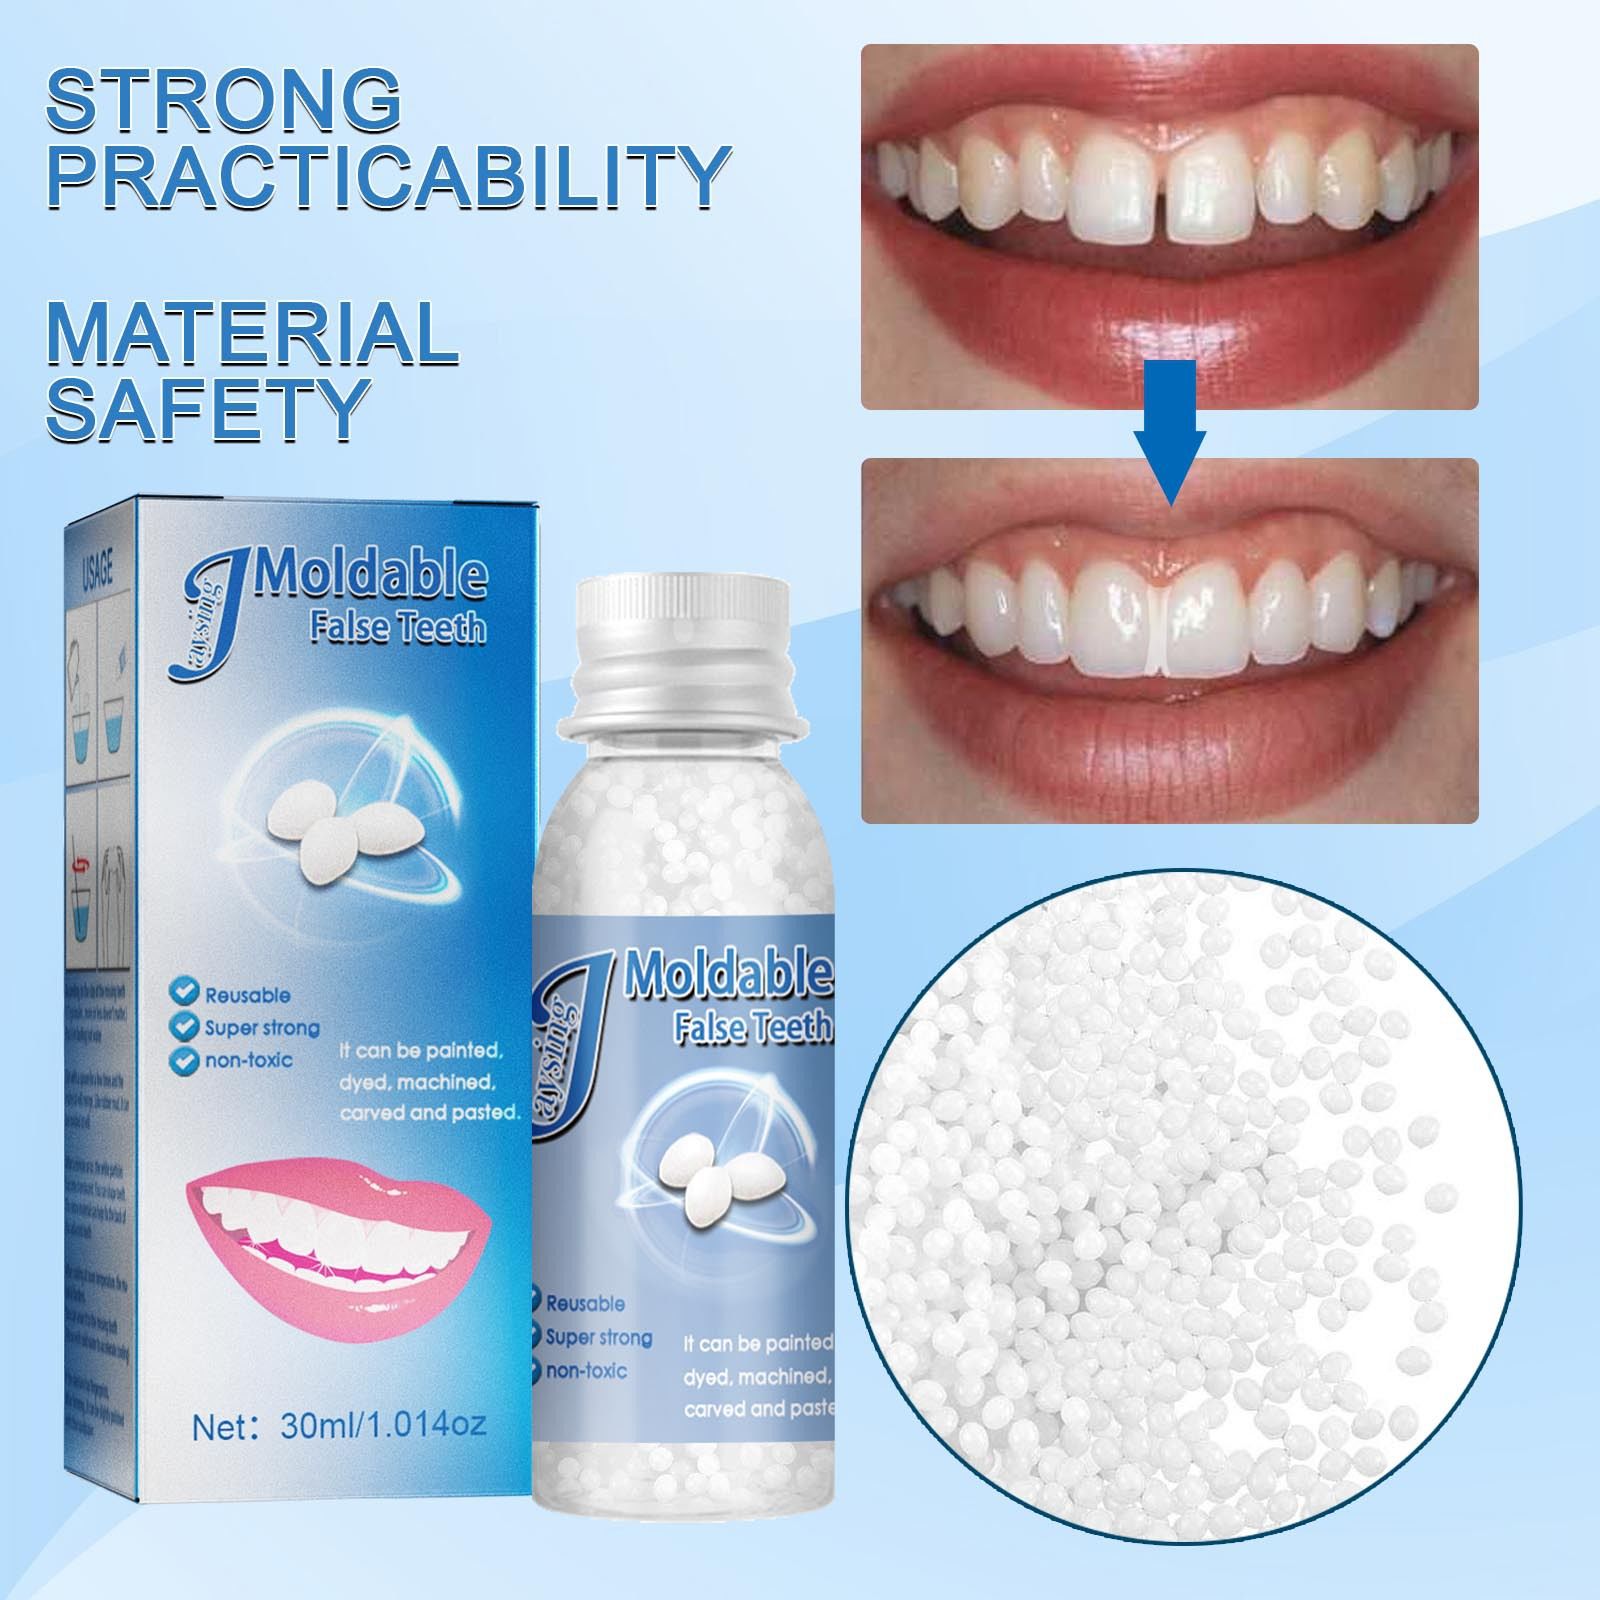 Thermal Fitting Beads, Tooth Filling Bead 100g Moldable Repair Temporary  Tooth Repair Bead for Broken Teeth Party